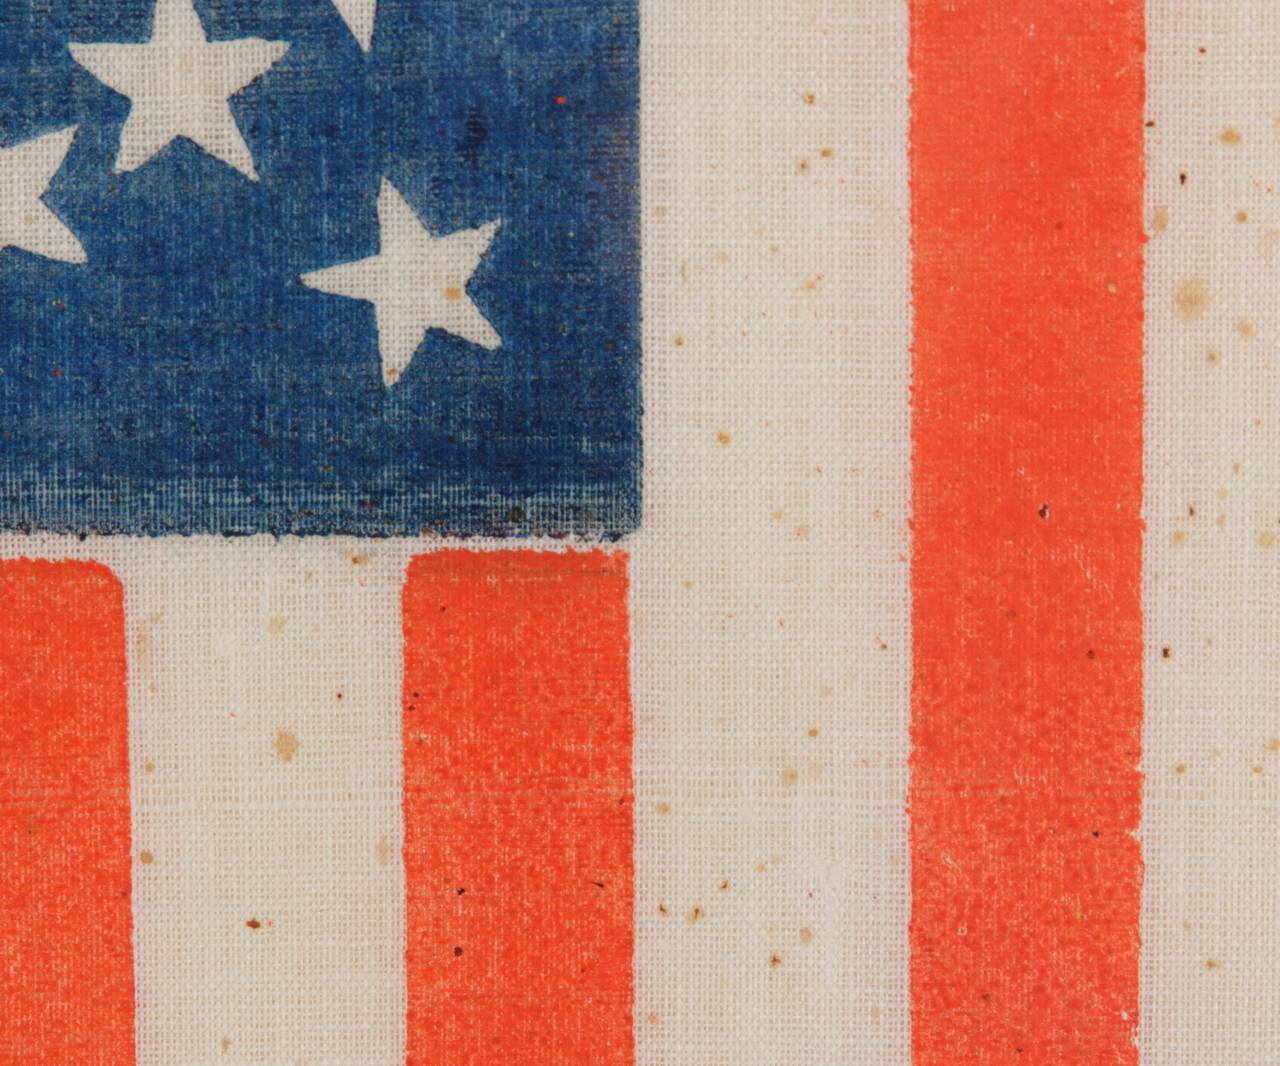 Late 19th Century 38 Star Flag In a Medallion Configuration With 2 Outliers